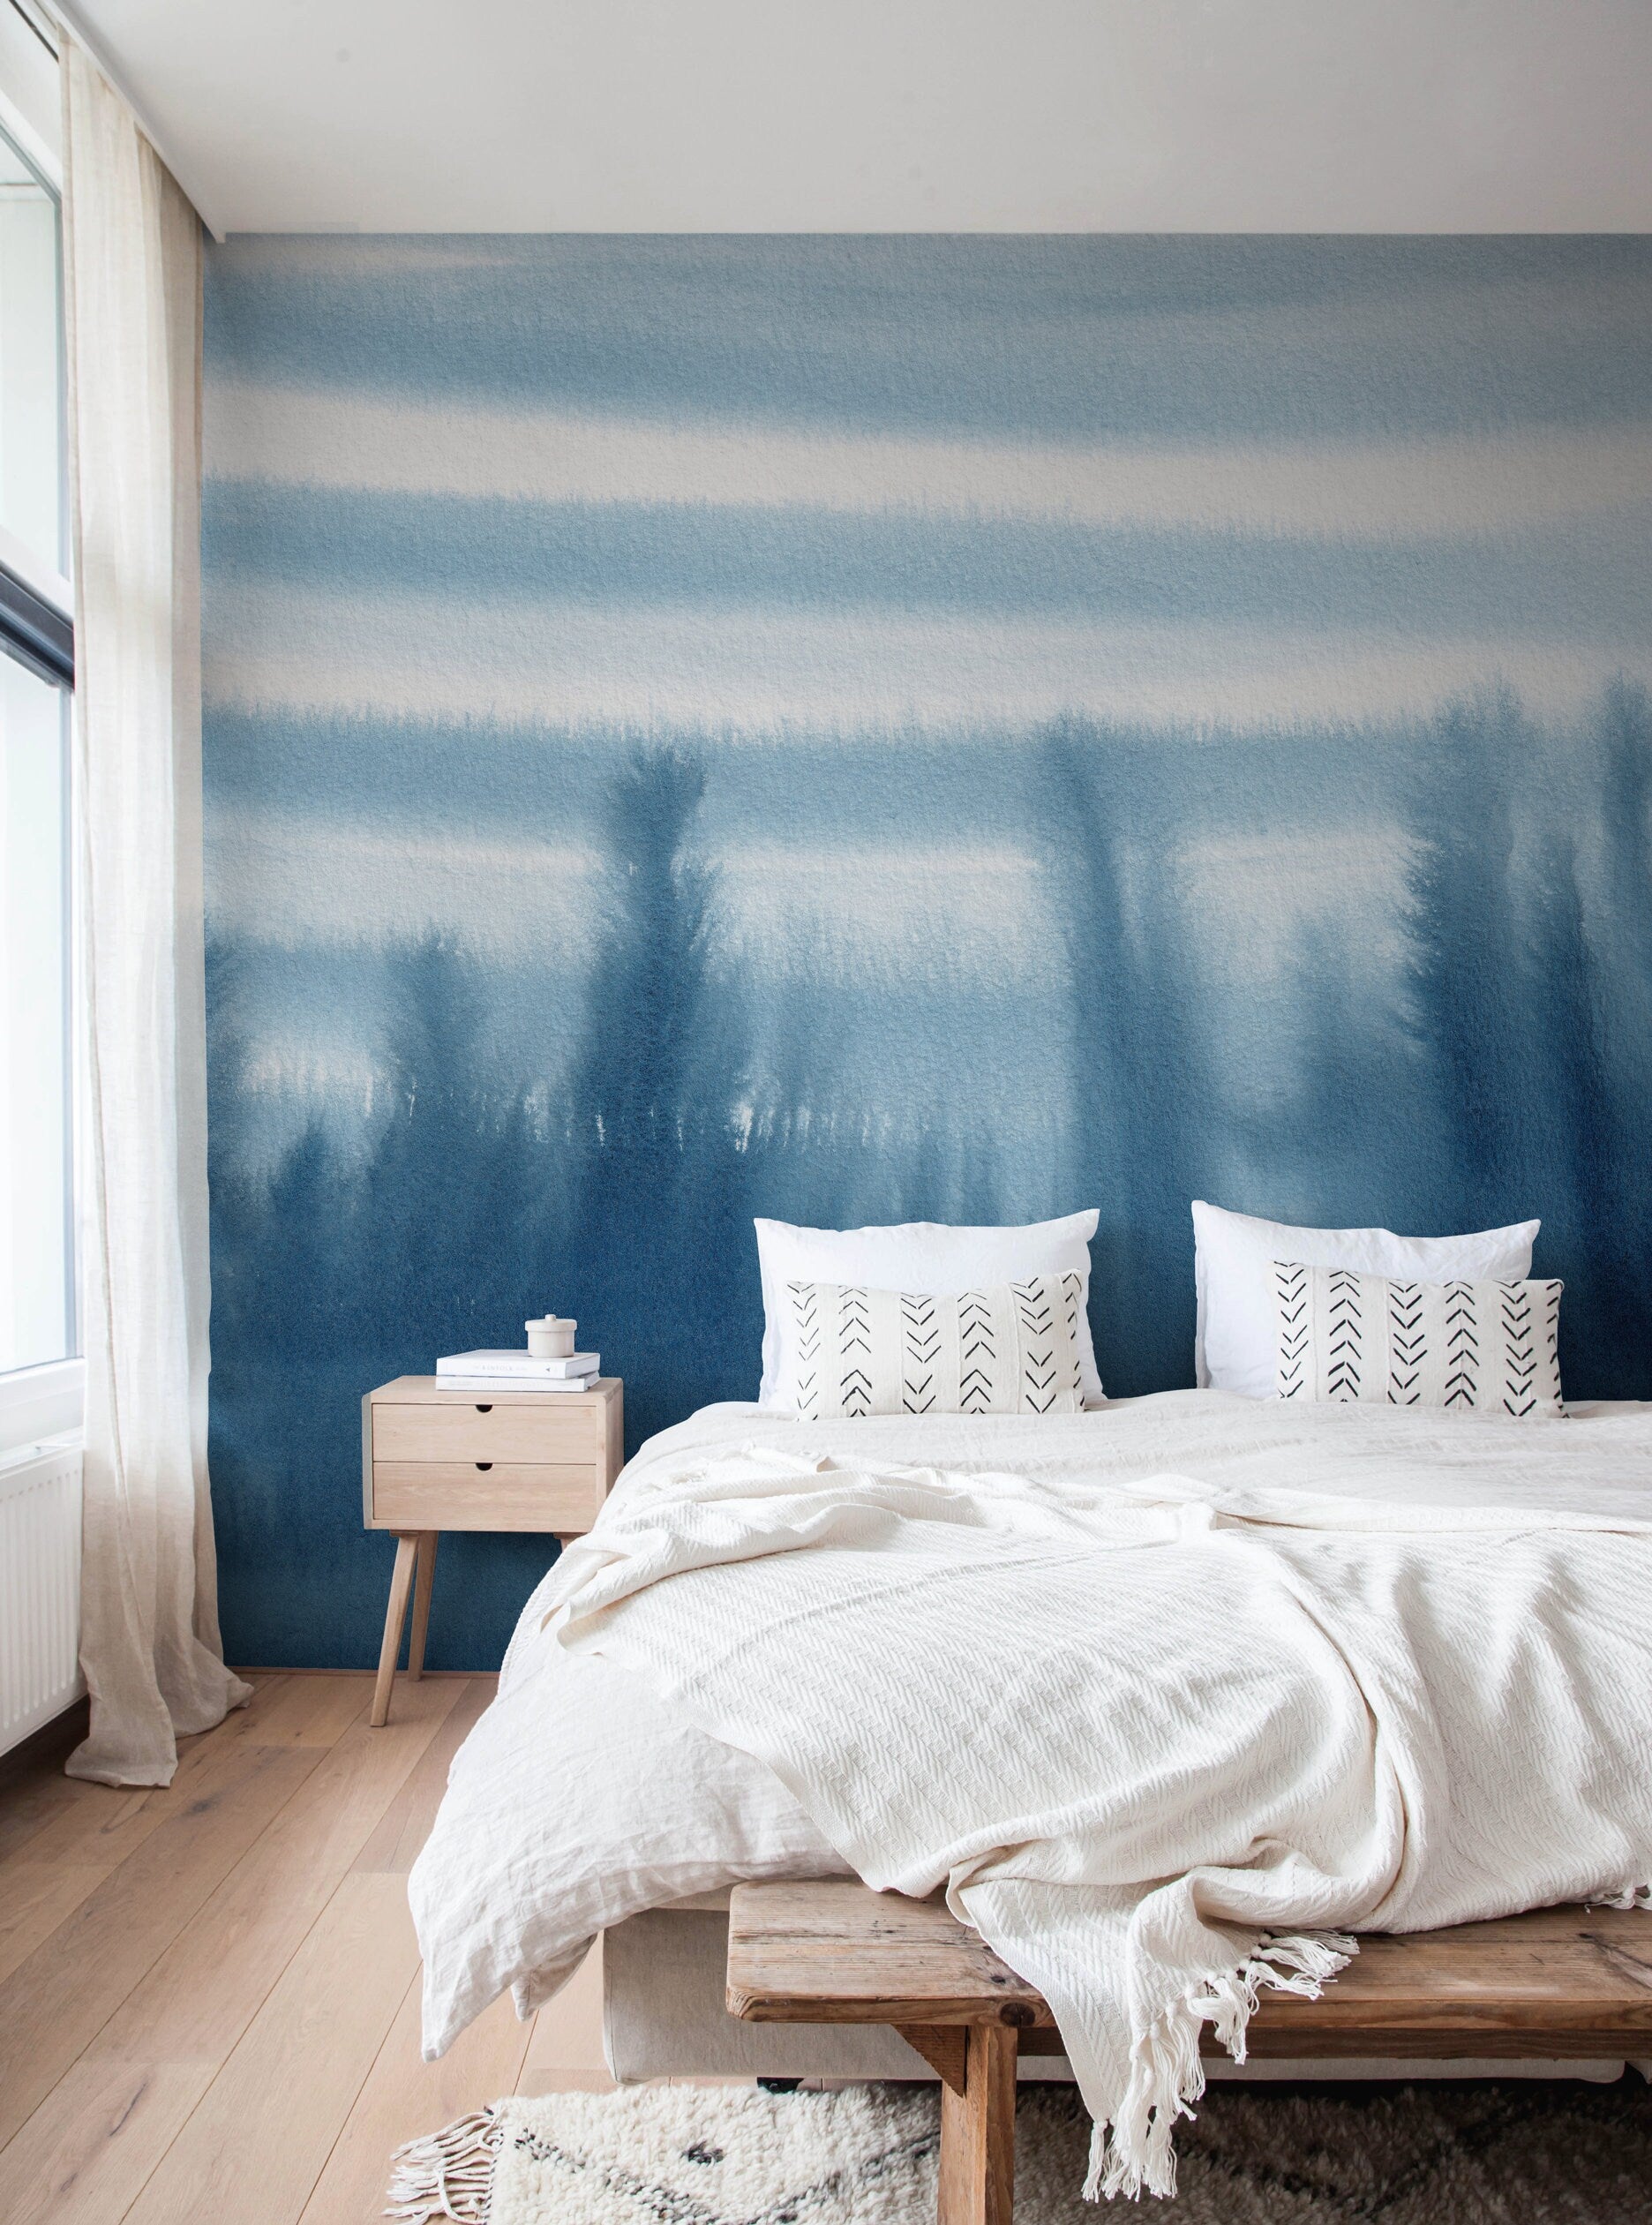 Wallpaper Peel and Stick Wallpaper Removable Wallpaper Home Decor Wall Art Wall Decor Room Decor / Blue Ombre Wallpaper - X156